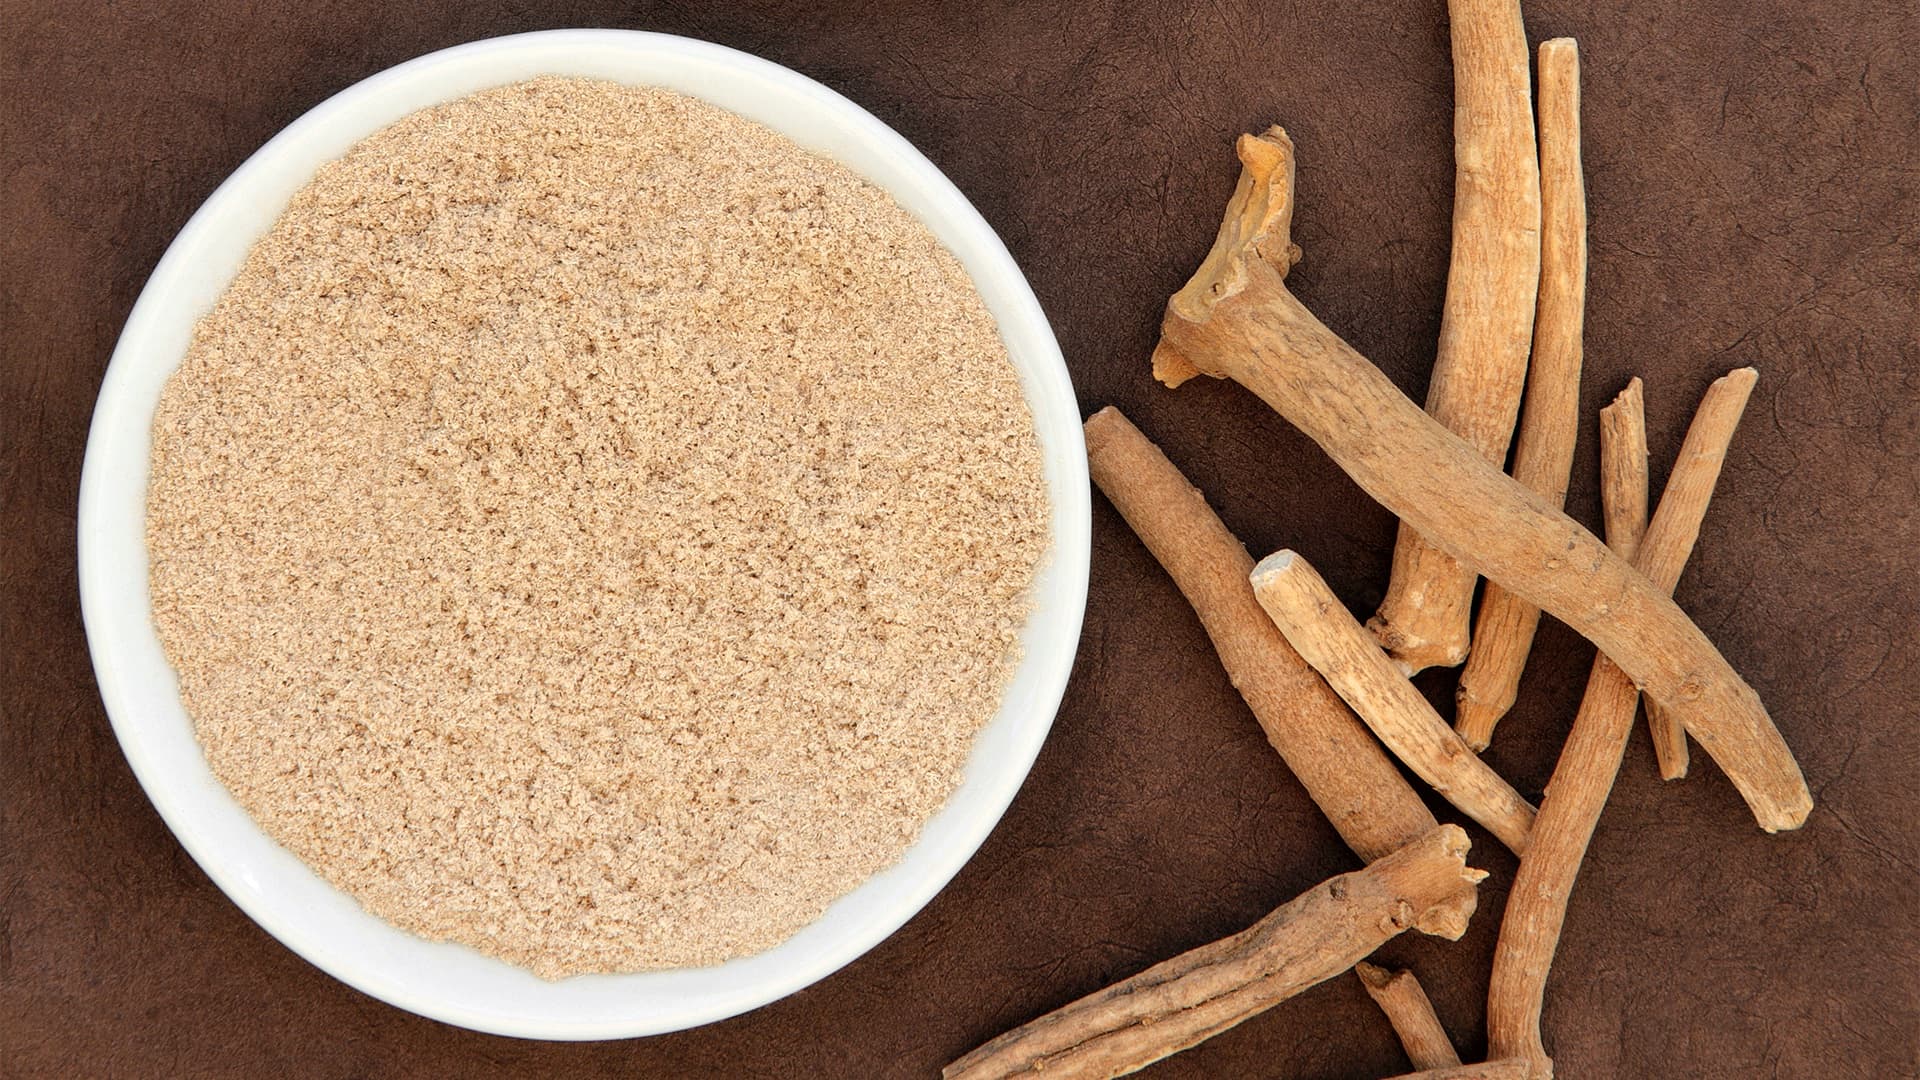 How To Supplement With Ginseng